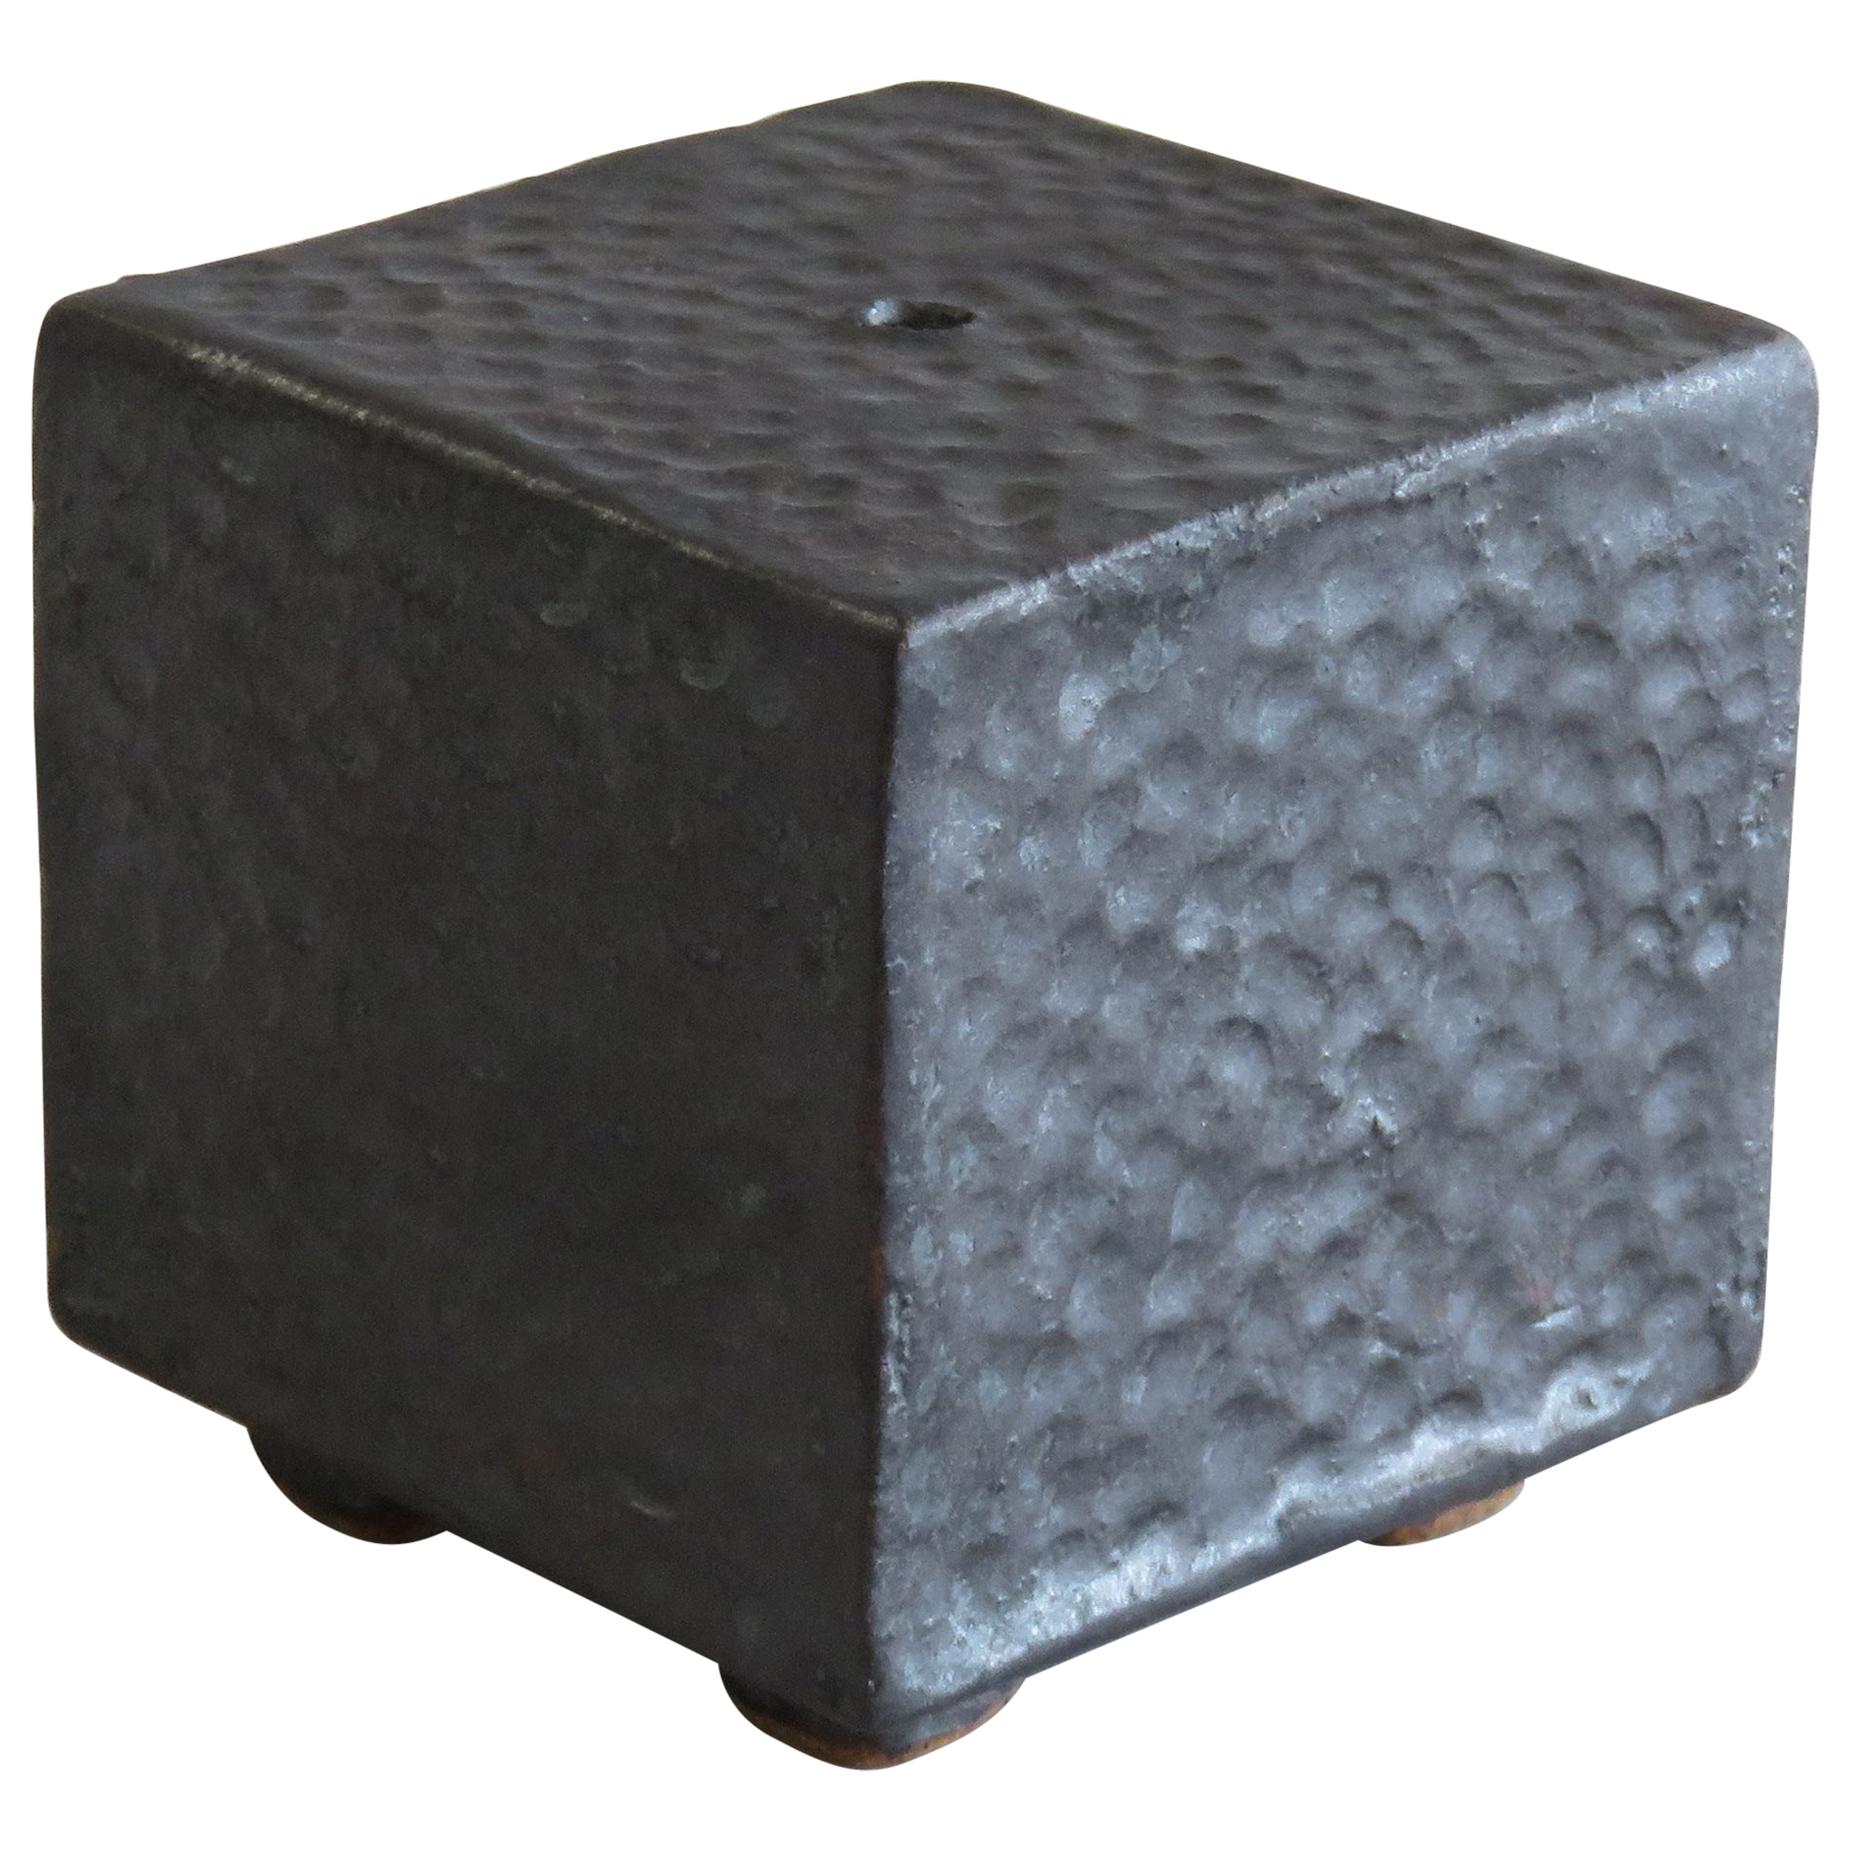 This small sculptural cube is hollow inside and stands on four small feet. Conceived as 